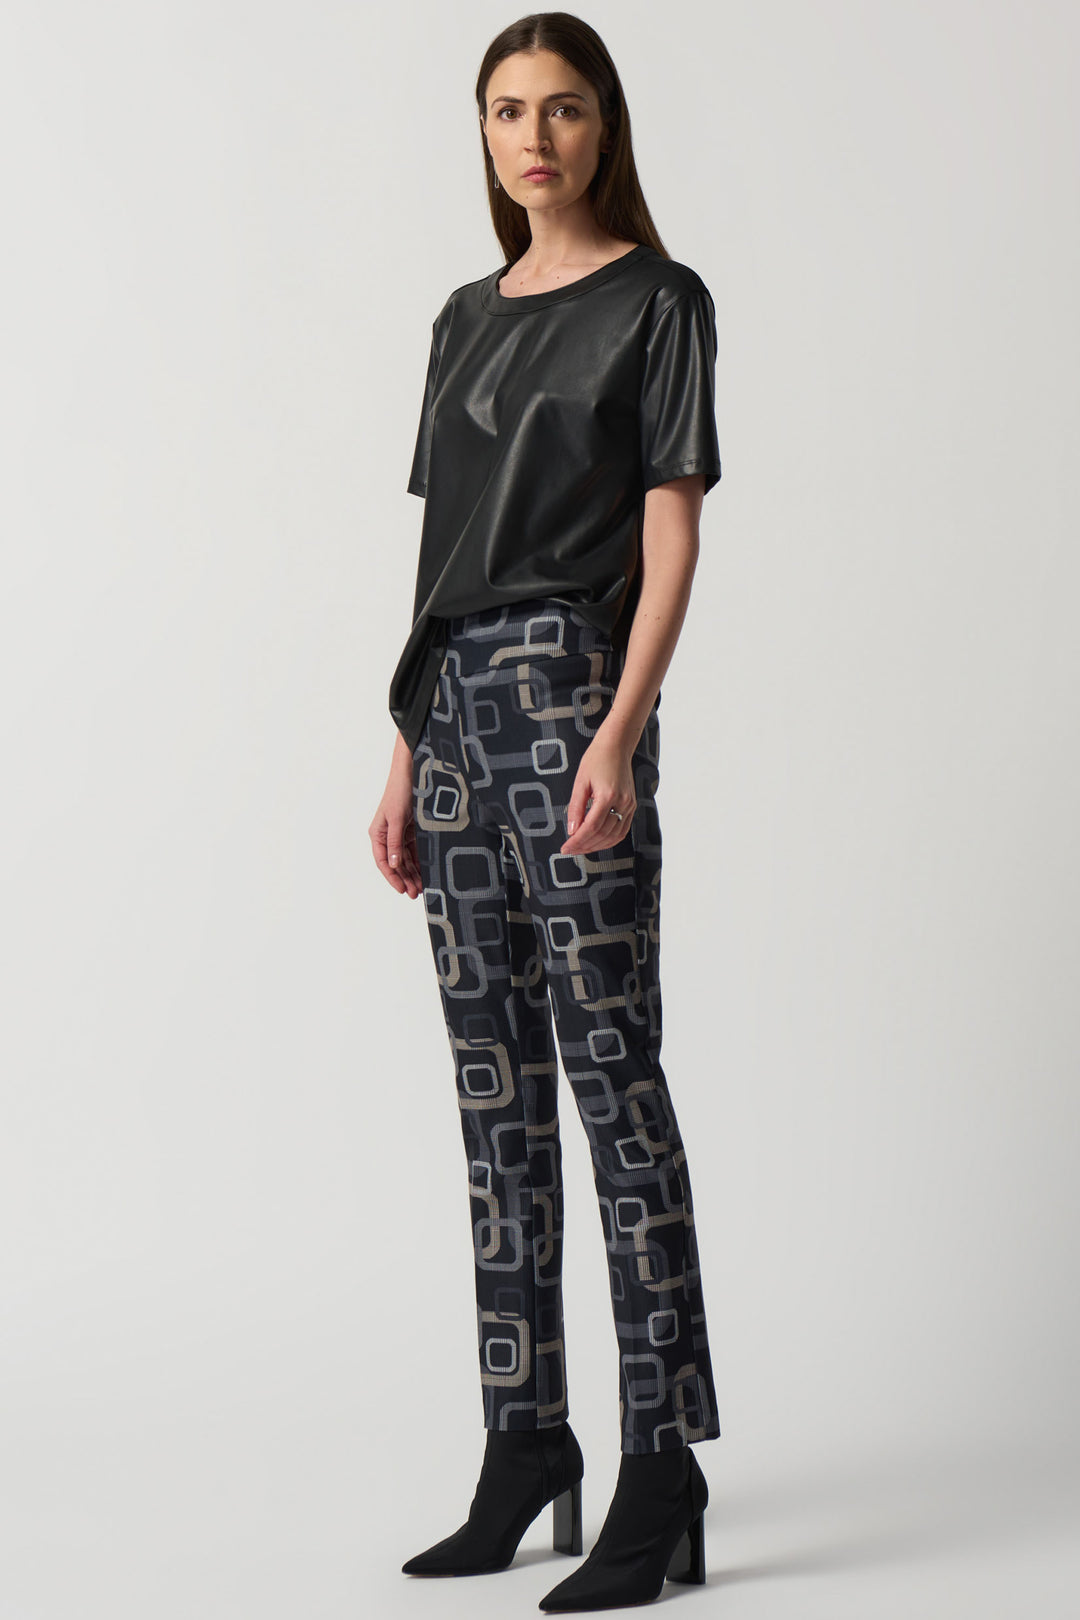 This pant features a classic plaid print that will give you a fashion-forward look. 